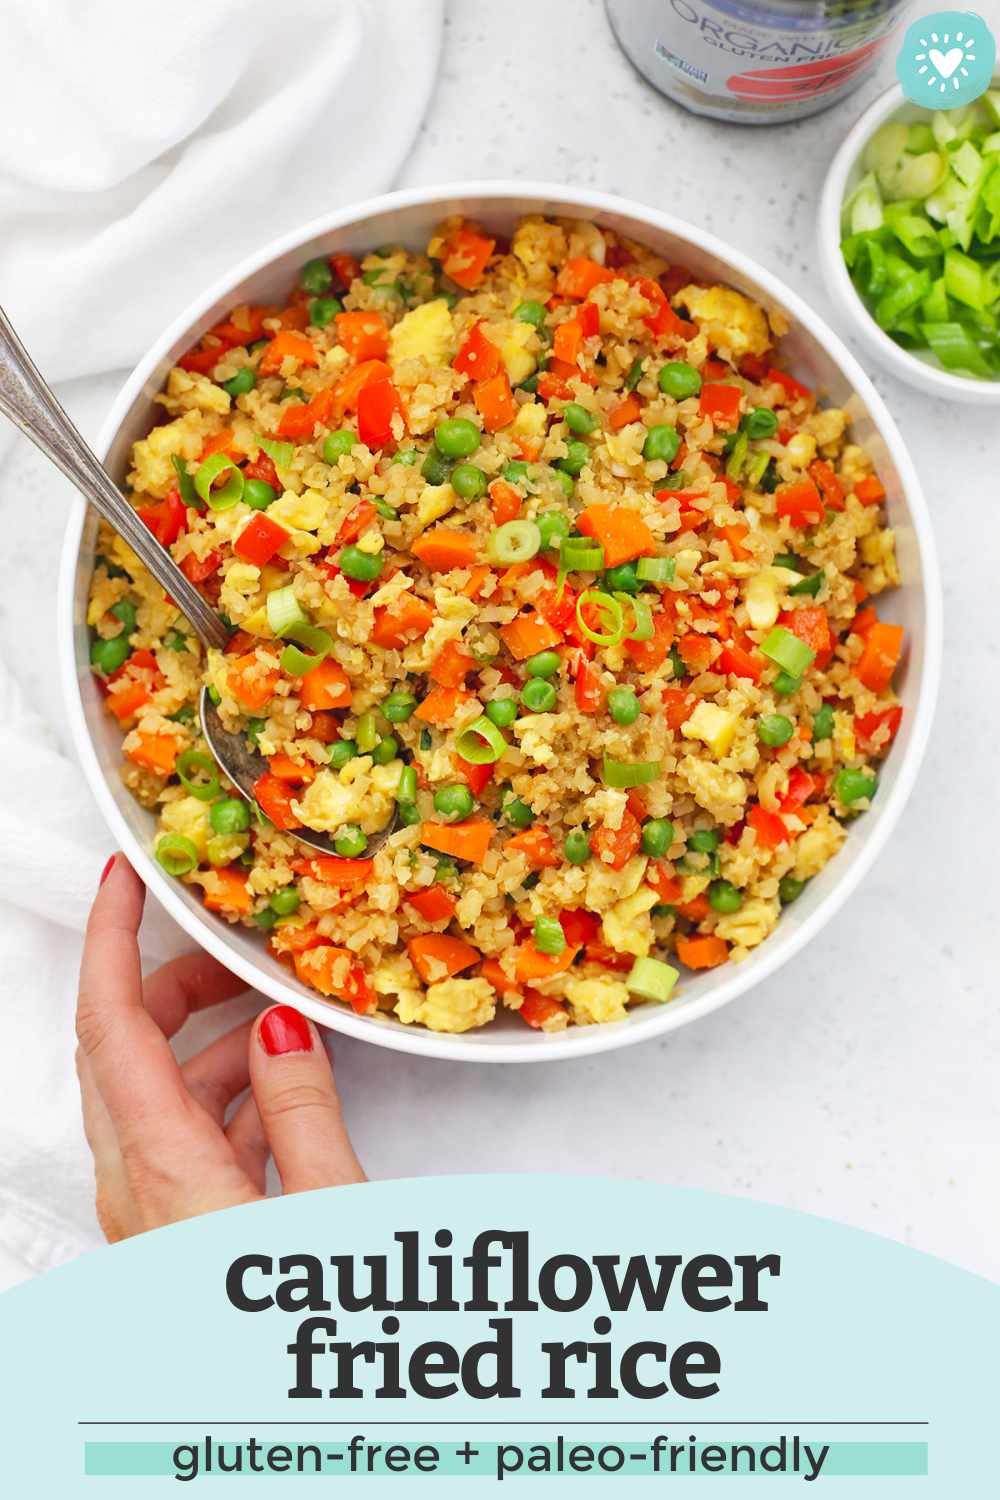 Collage of images of cauliflower fried rice with a text overlay that reads "Cauliflower Fried Rice. Gluten-Free + Paleo-Friendly"